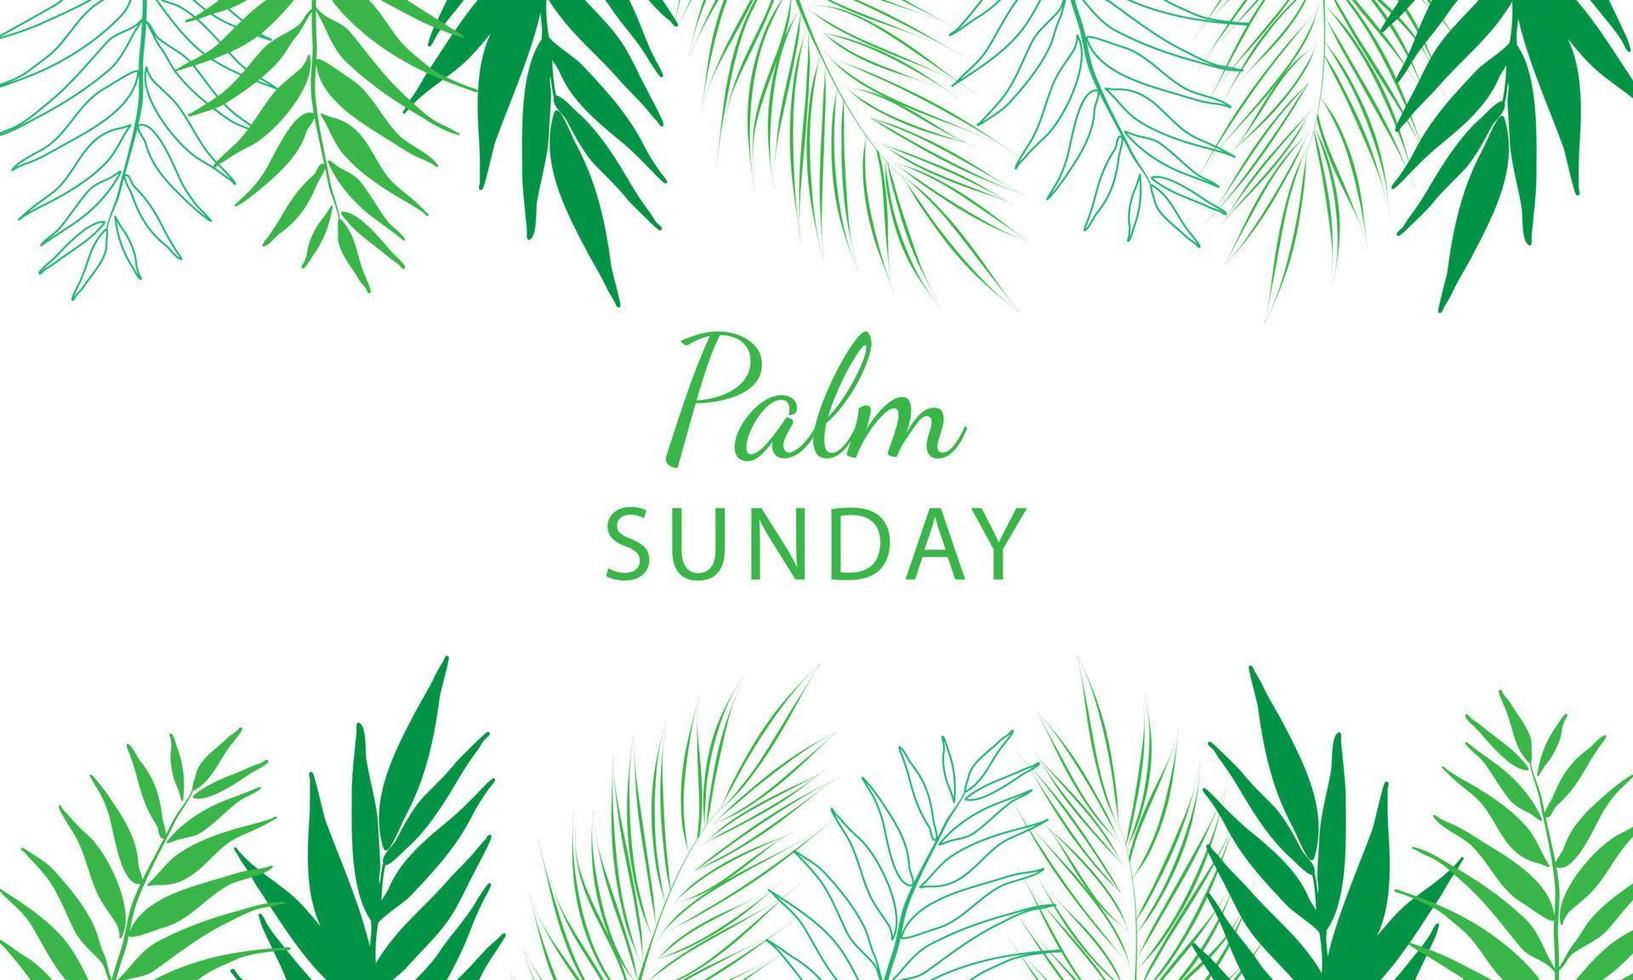 Palm Sunday - greeting banner template for Christian holiday, with palm tree leaves background. vector